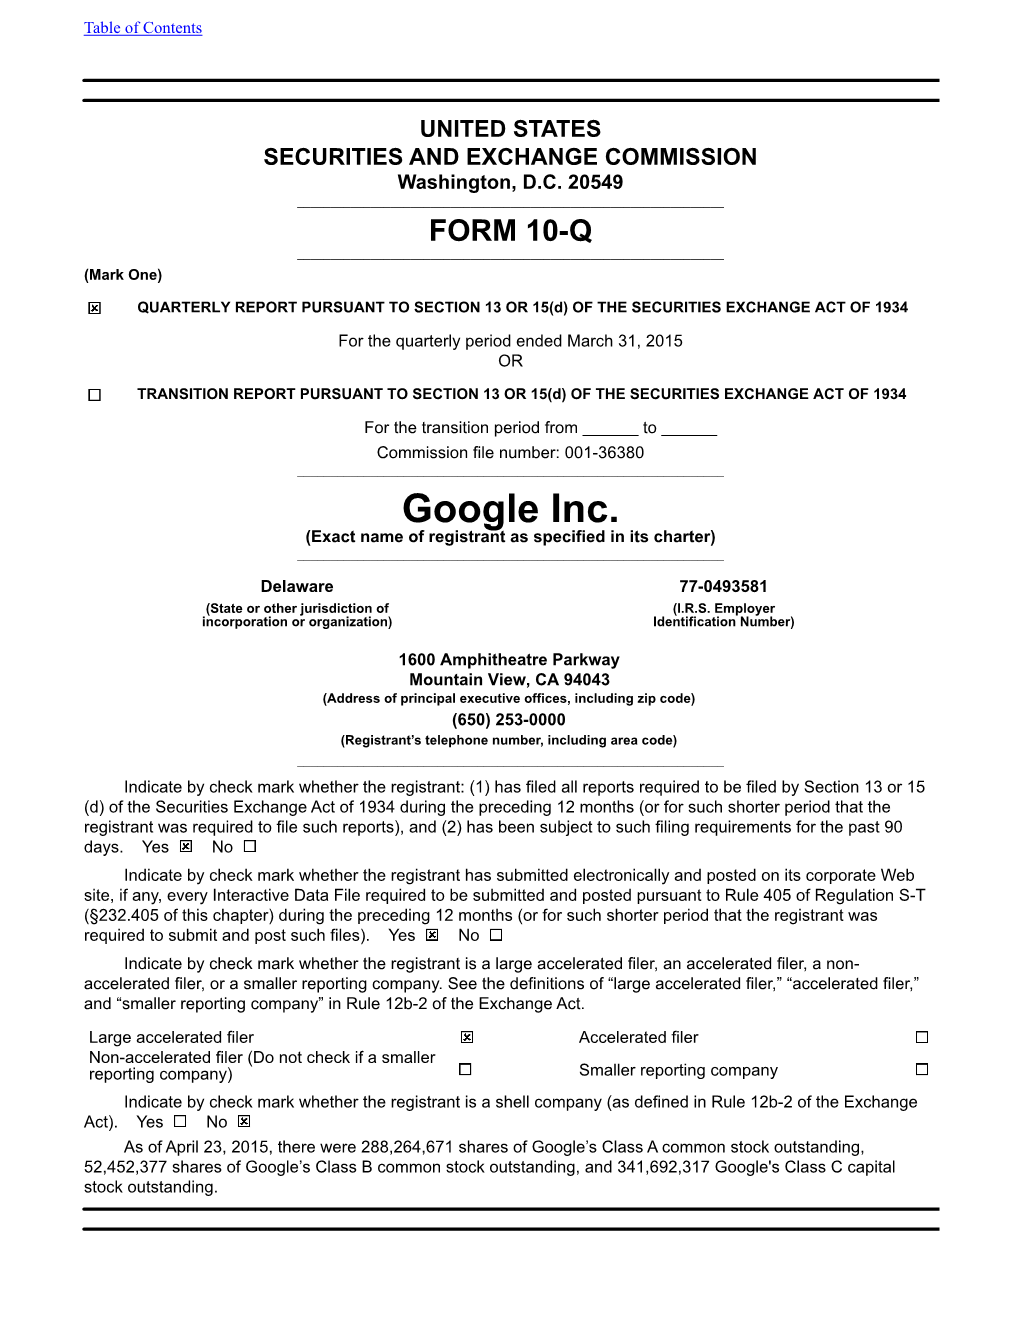 Google Inc. (Exact Name of Registrant As Specified in Its Charter) ______